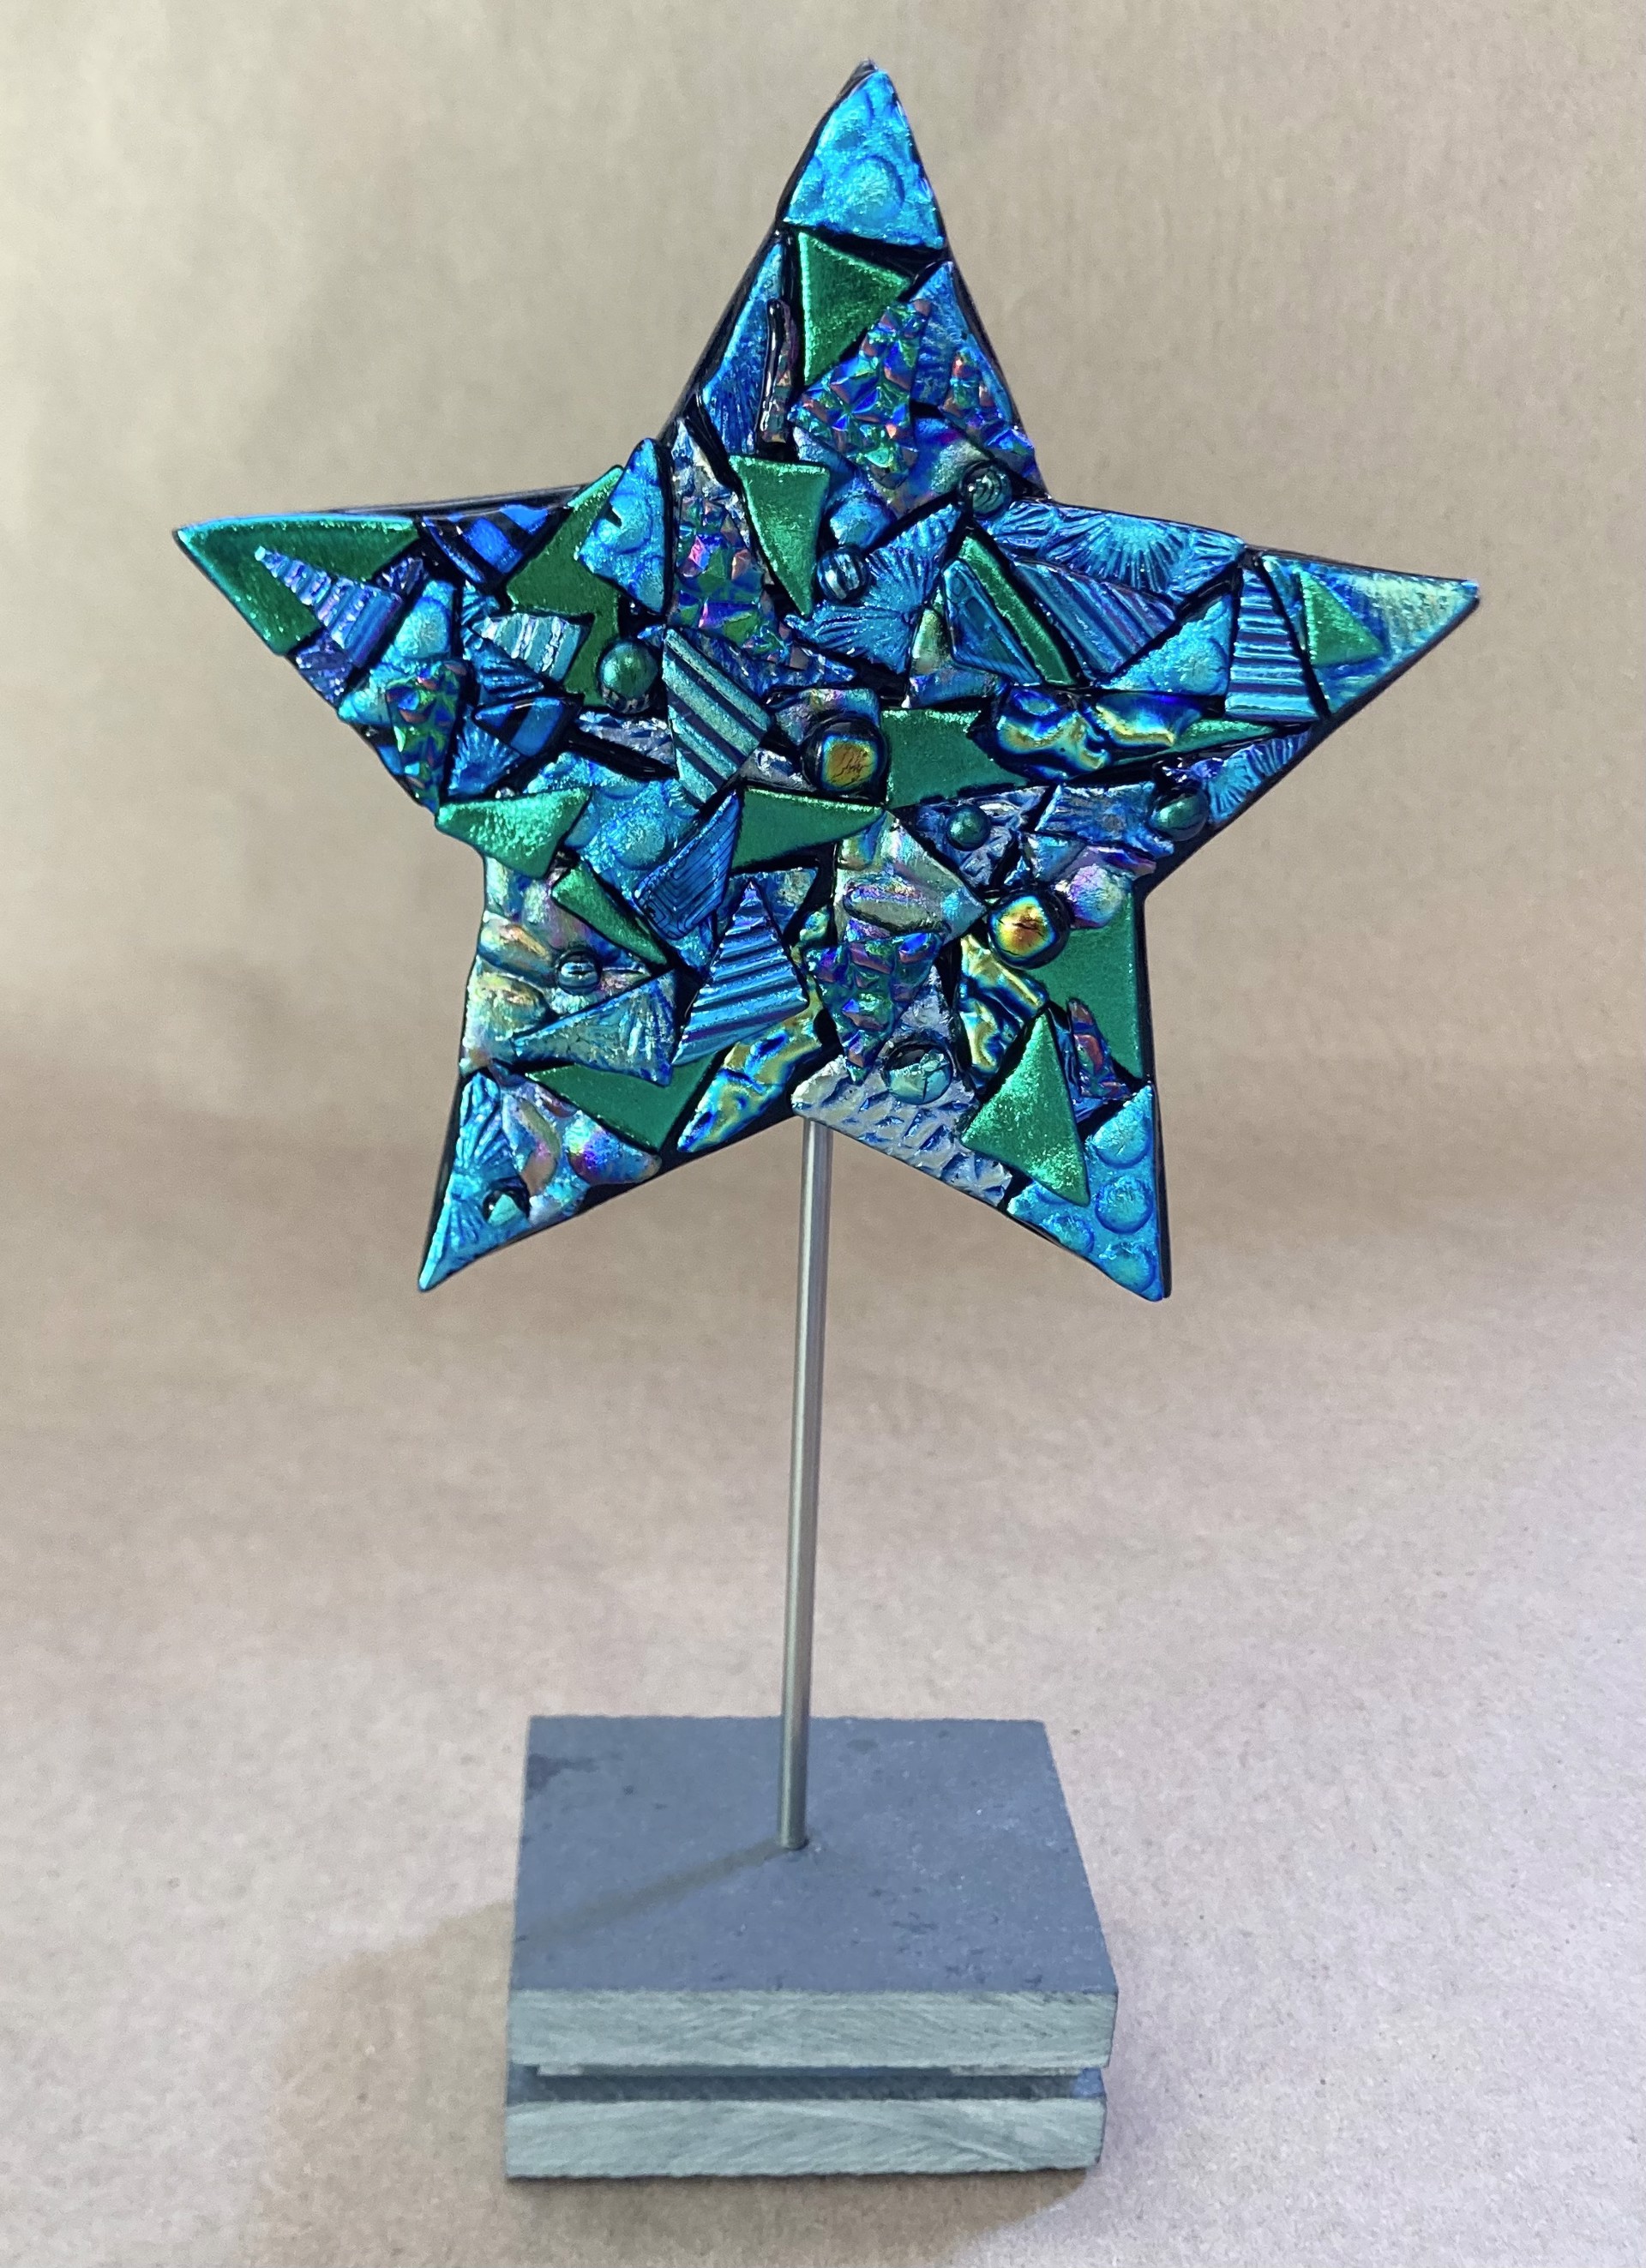 Star on Stand #2 by Doug and Barbara Henderson